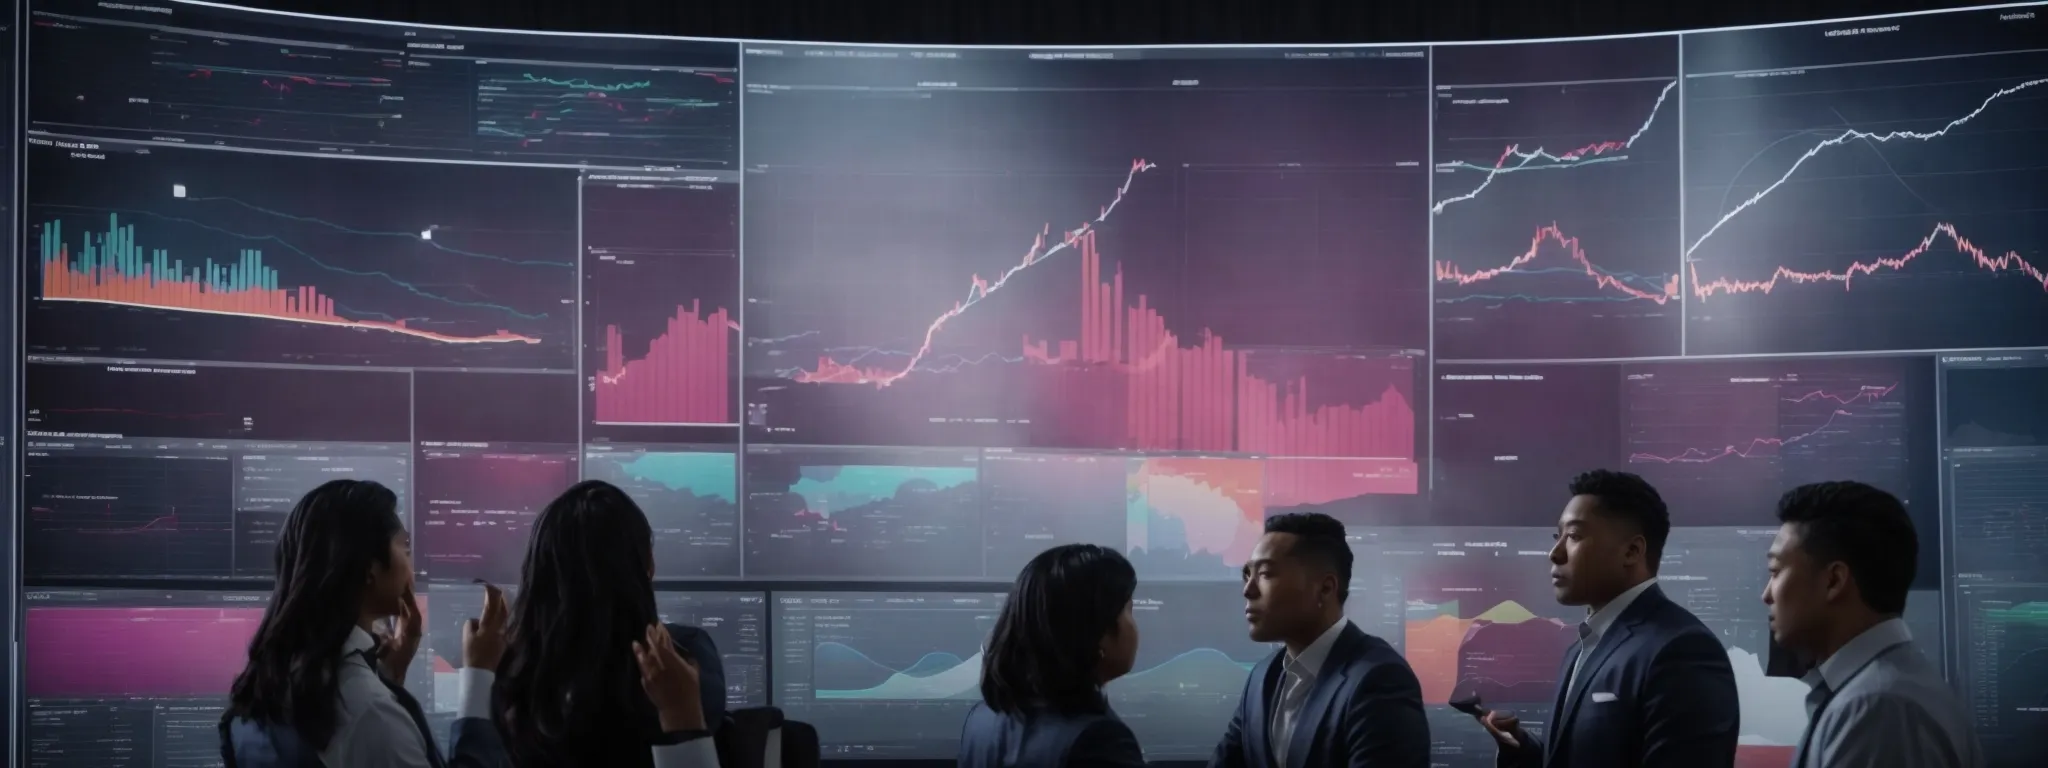 a diverse group of marketing professionals engaged in an animated discussion around a large, high-tech digital display showcasing graphs and analytics.